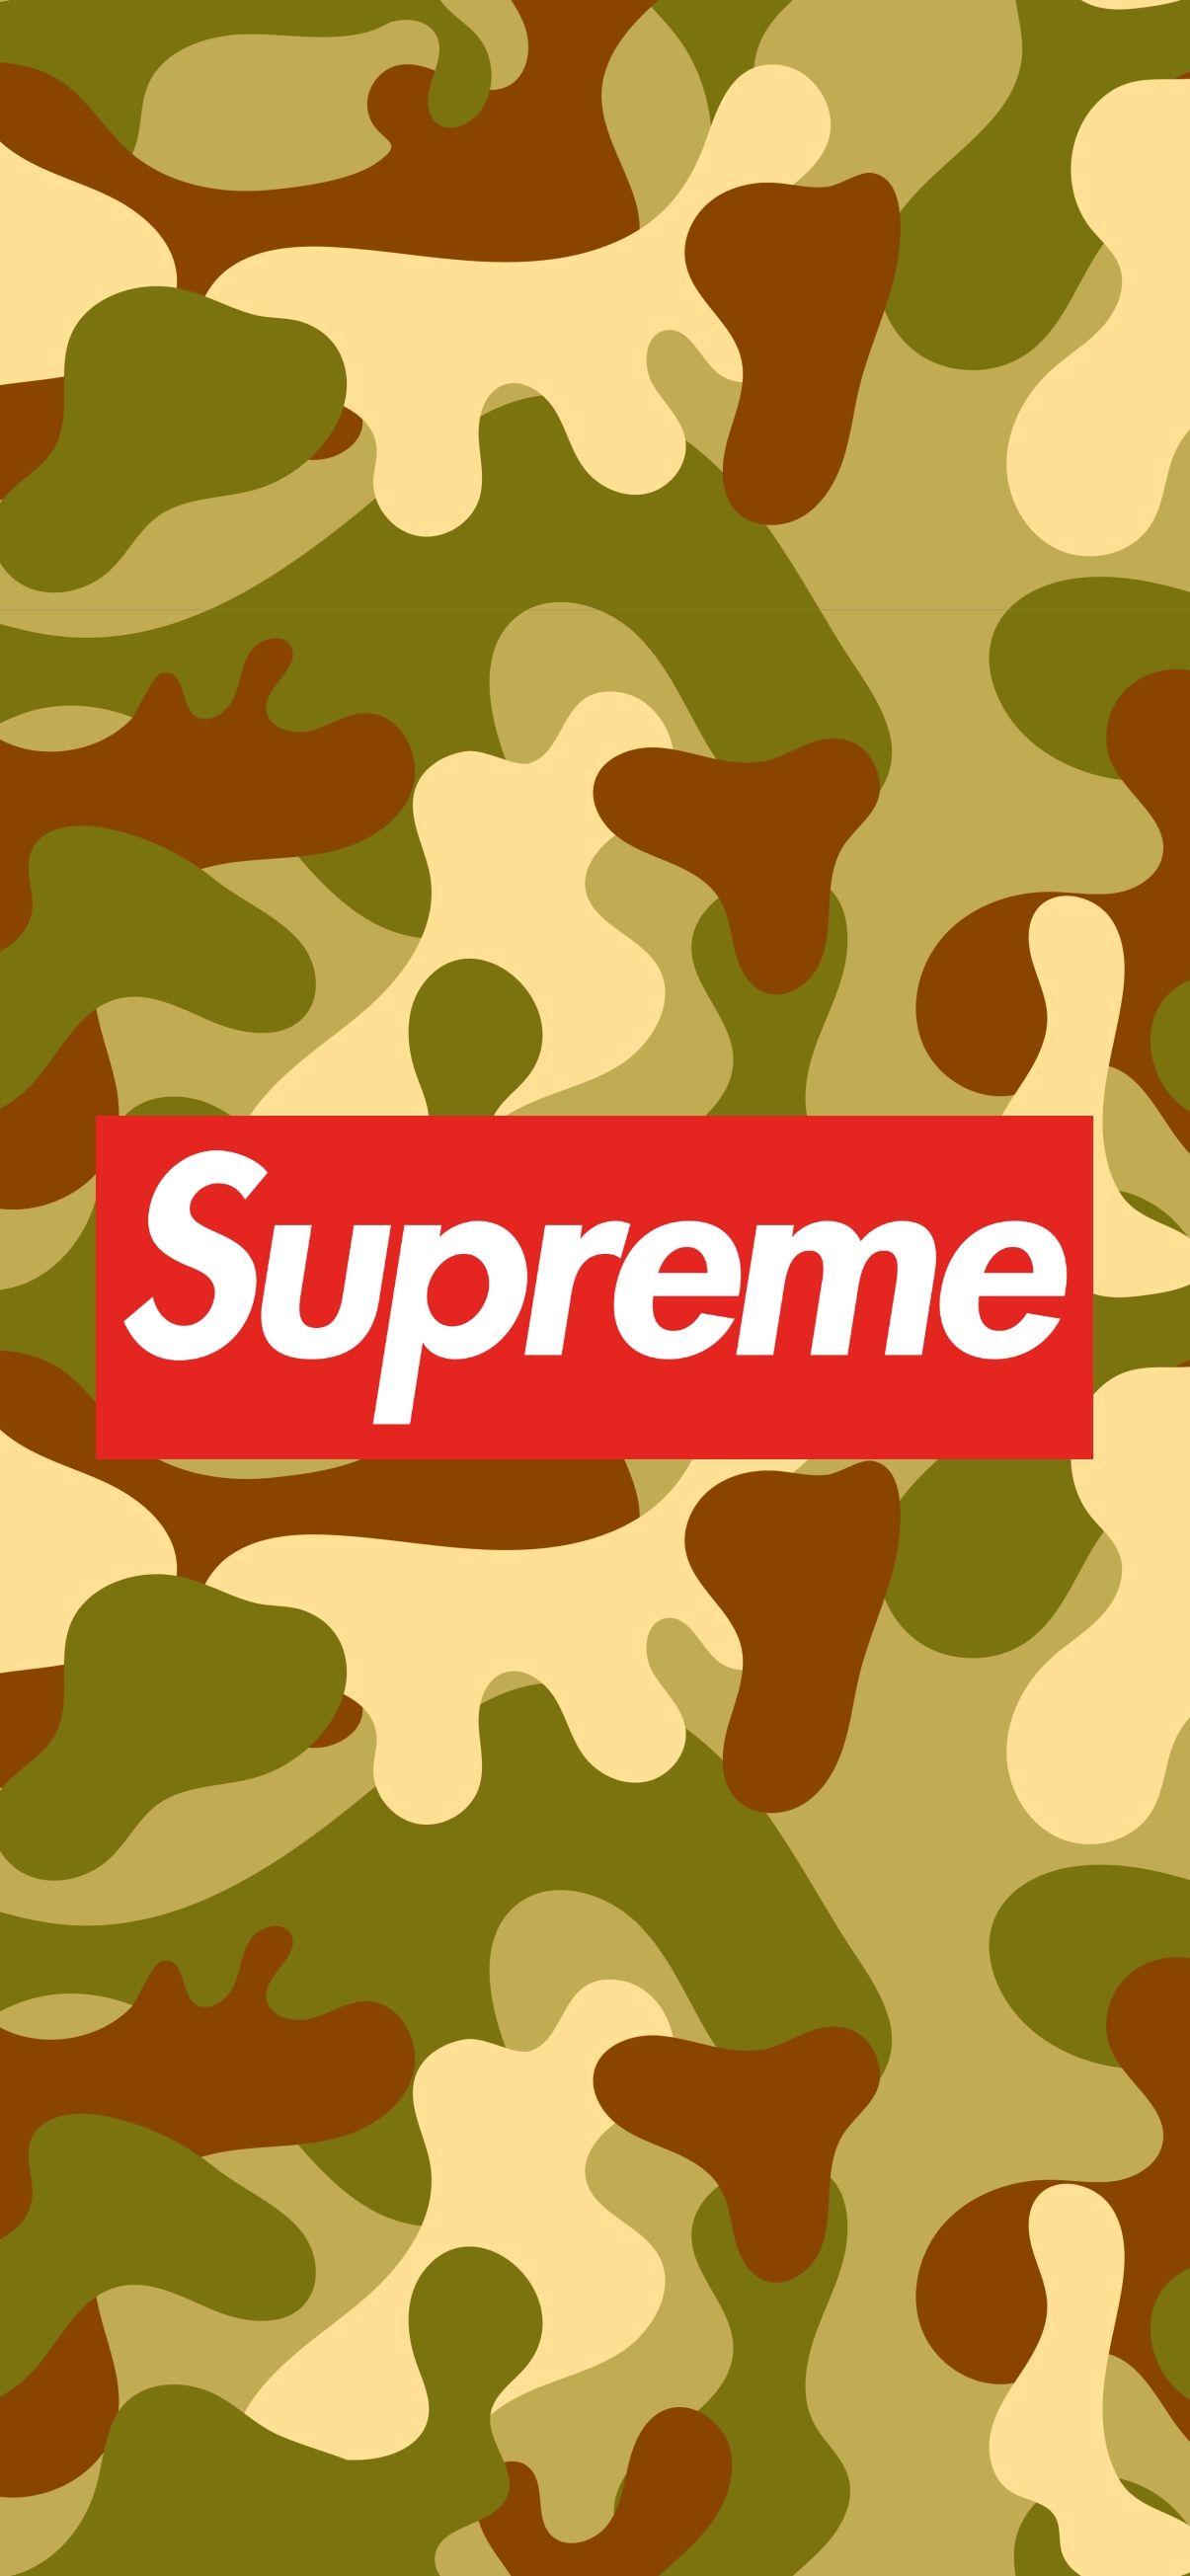 Supreme camouflage iphone wallpaper. Background Wallpaper